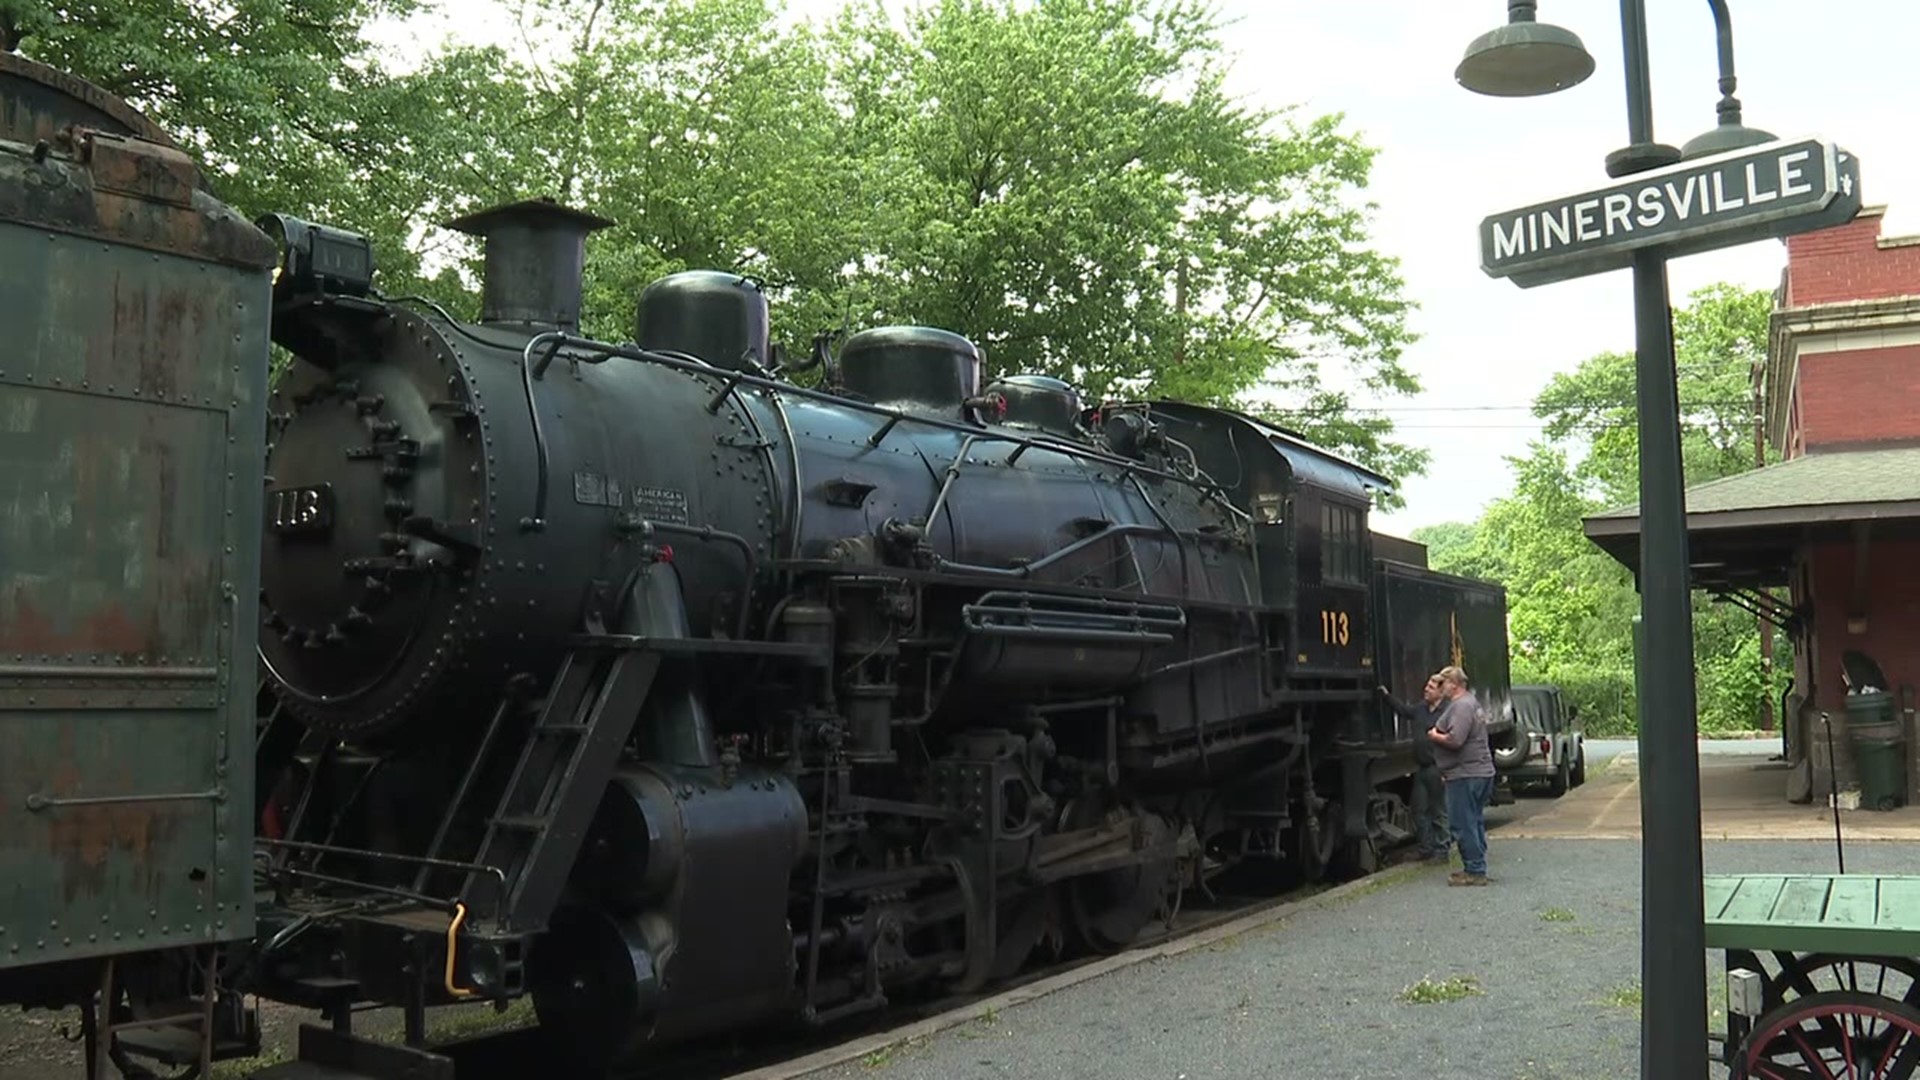 A train restoration group in Schuylkill County is hoping to get its engineer back on track after a difficult diagnosis.